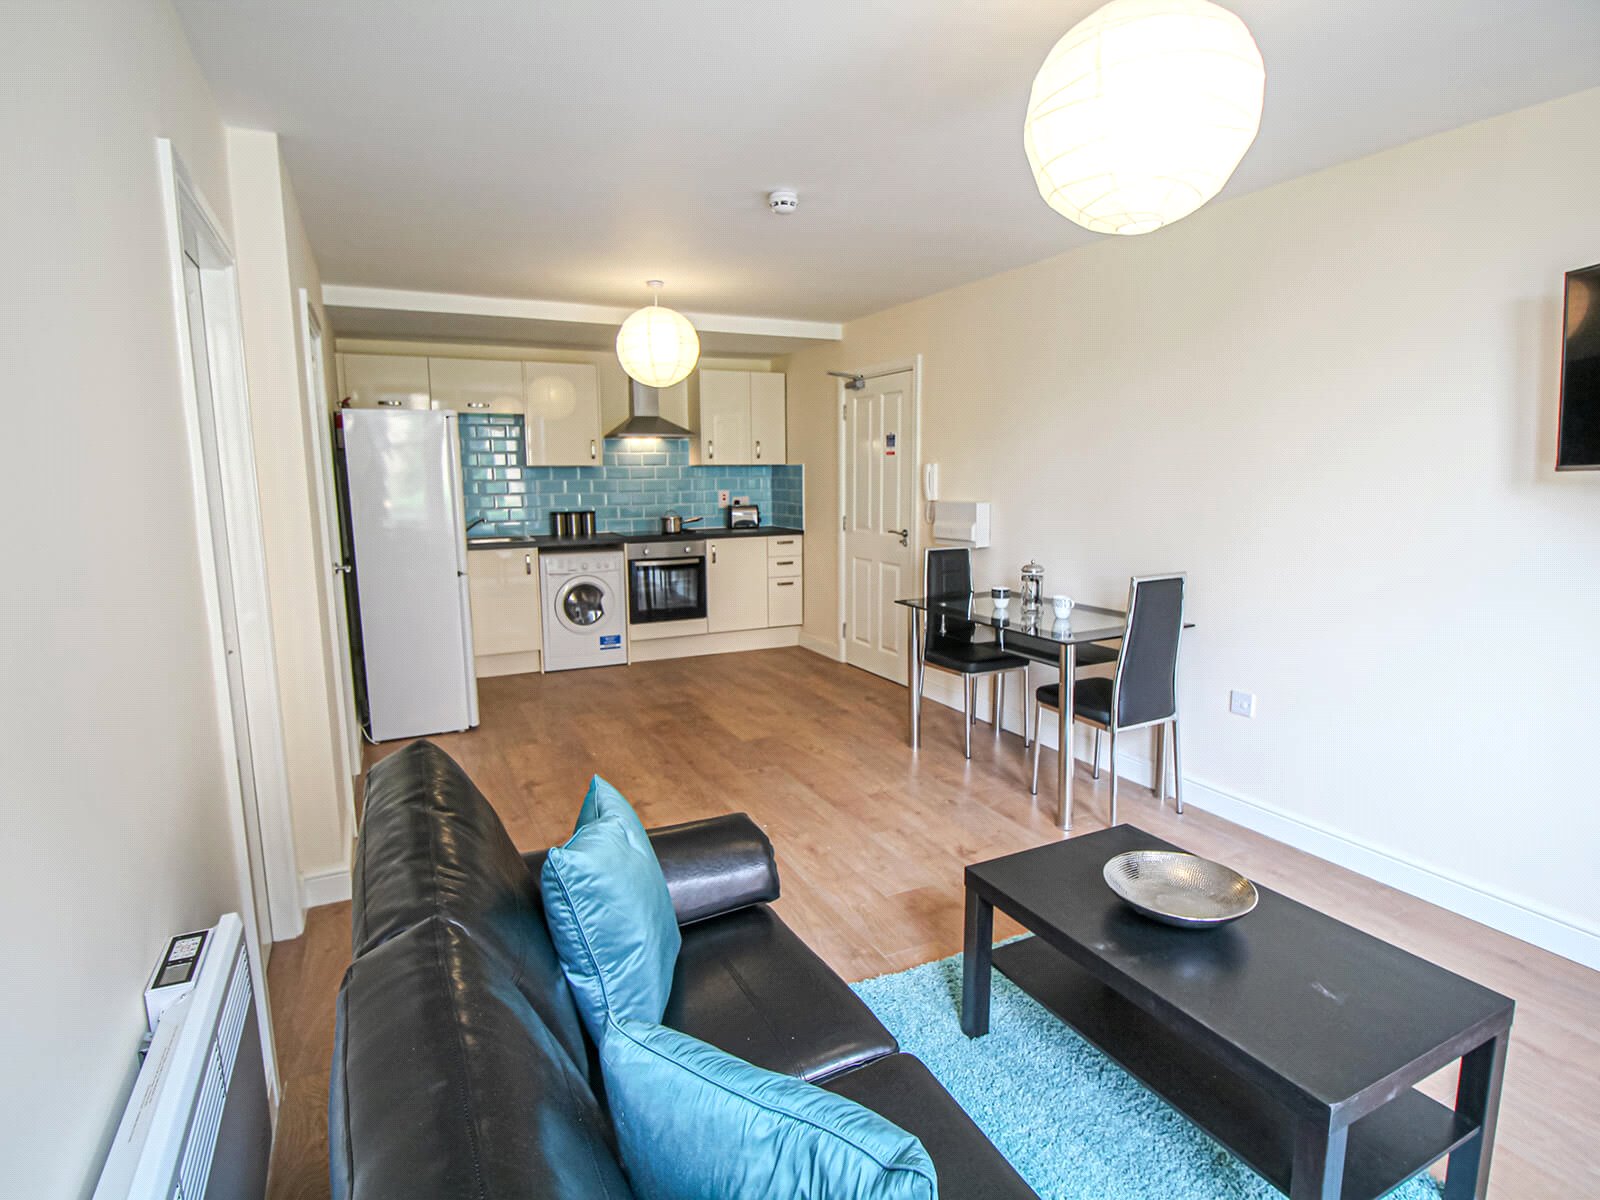 1 bed apartment for rent in Harrogate. From YPP - Leeds